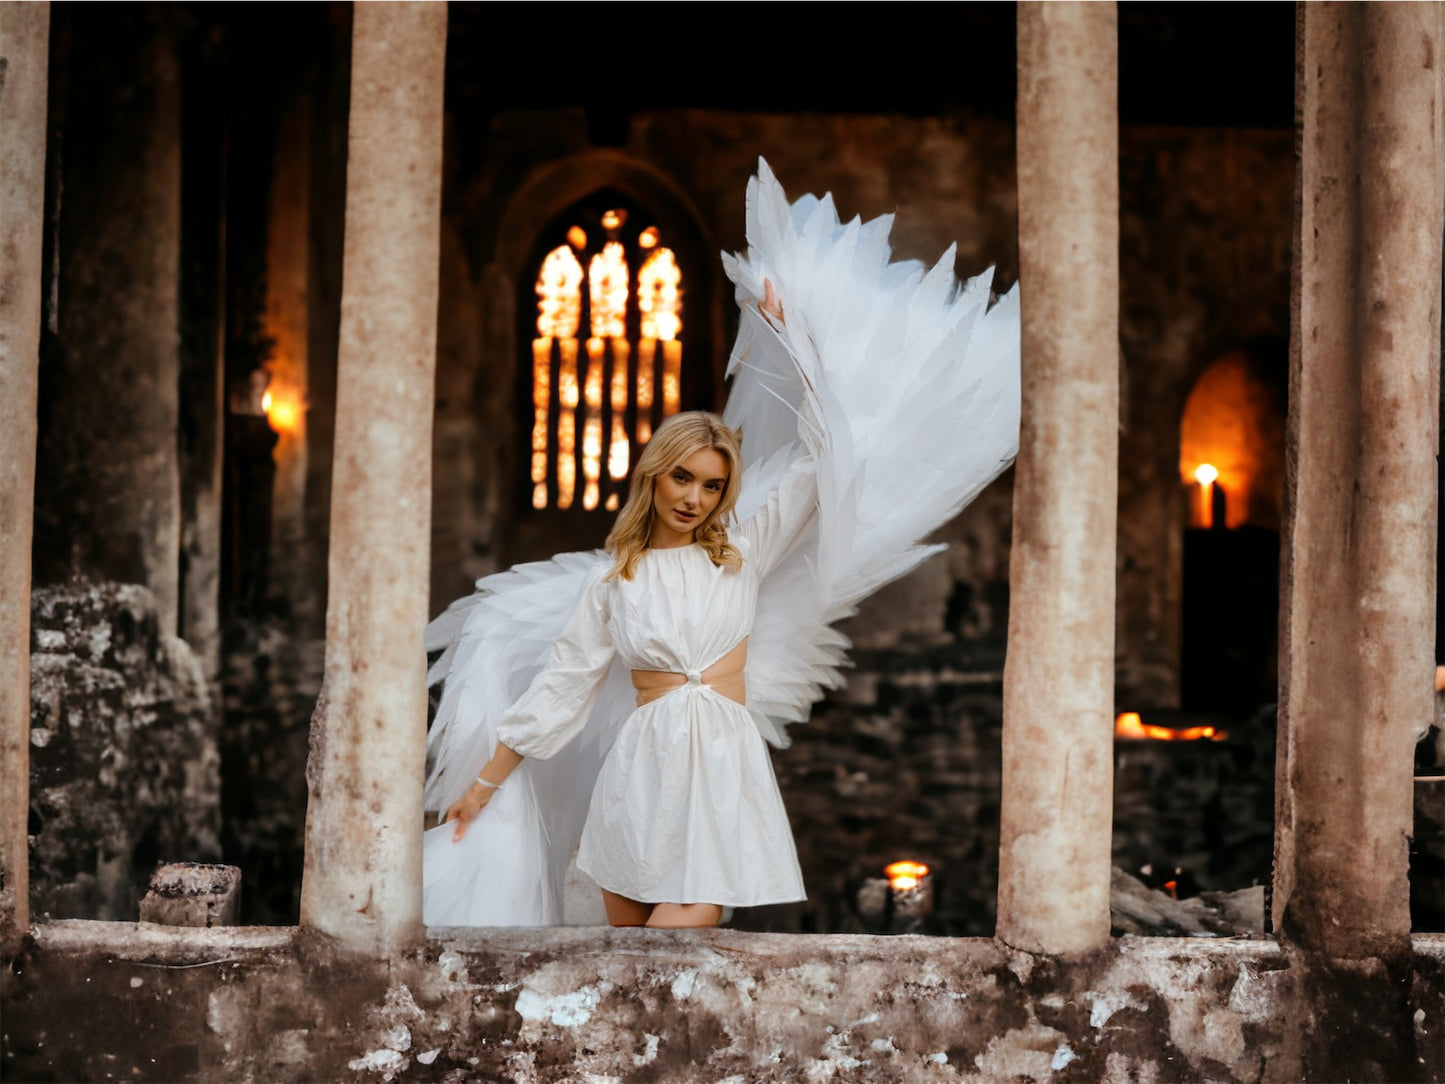 White wings for dancing  "Bogacci brand"